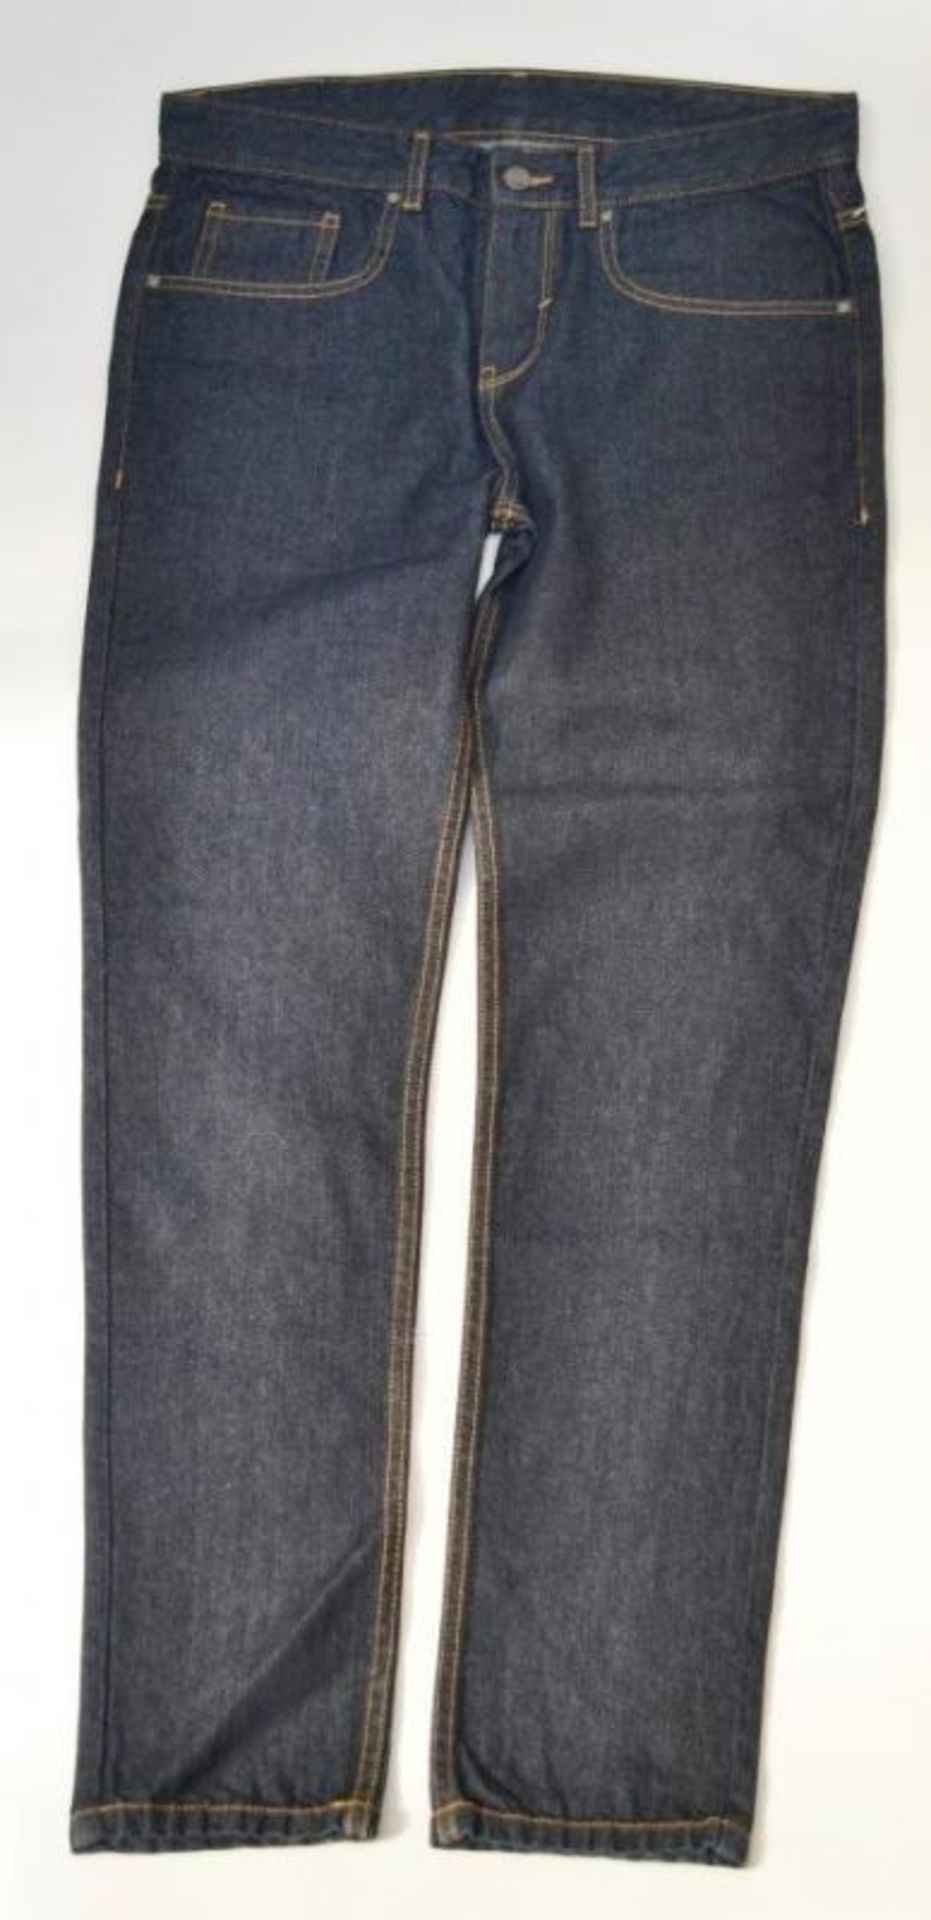 4 x Assorted Pairs Of PRE END Branded Mens Jeans - New Stock With Tags - Recent Retail Closure - - Image 4 of 5